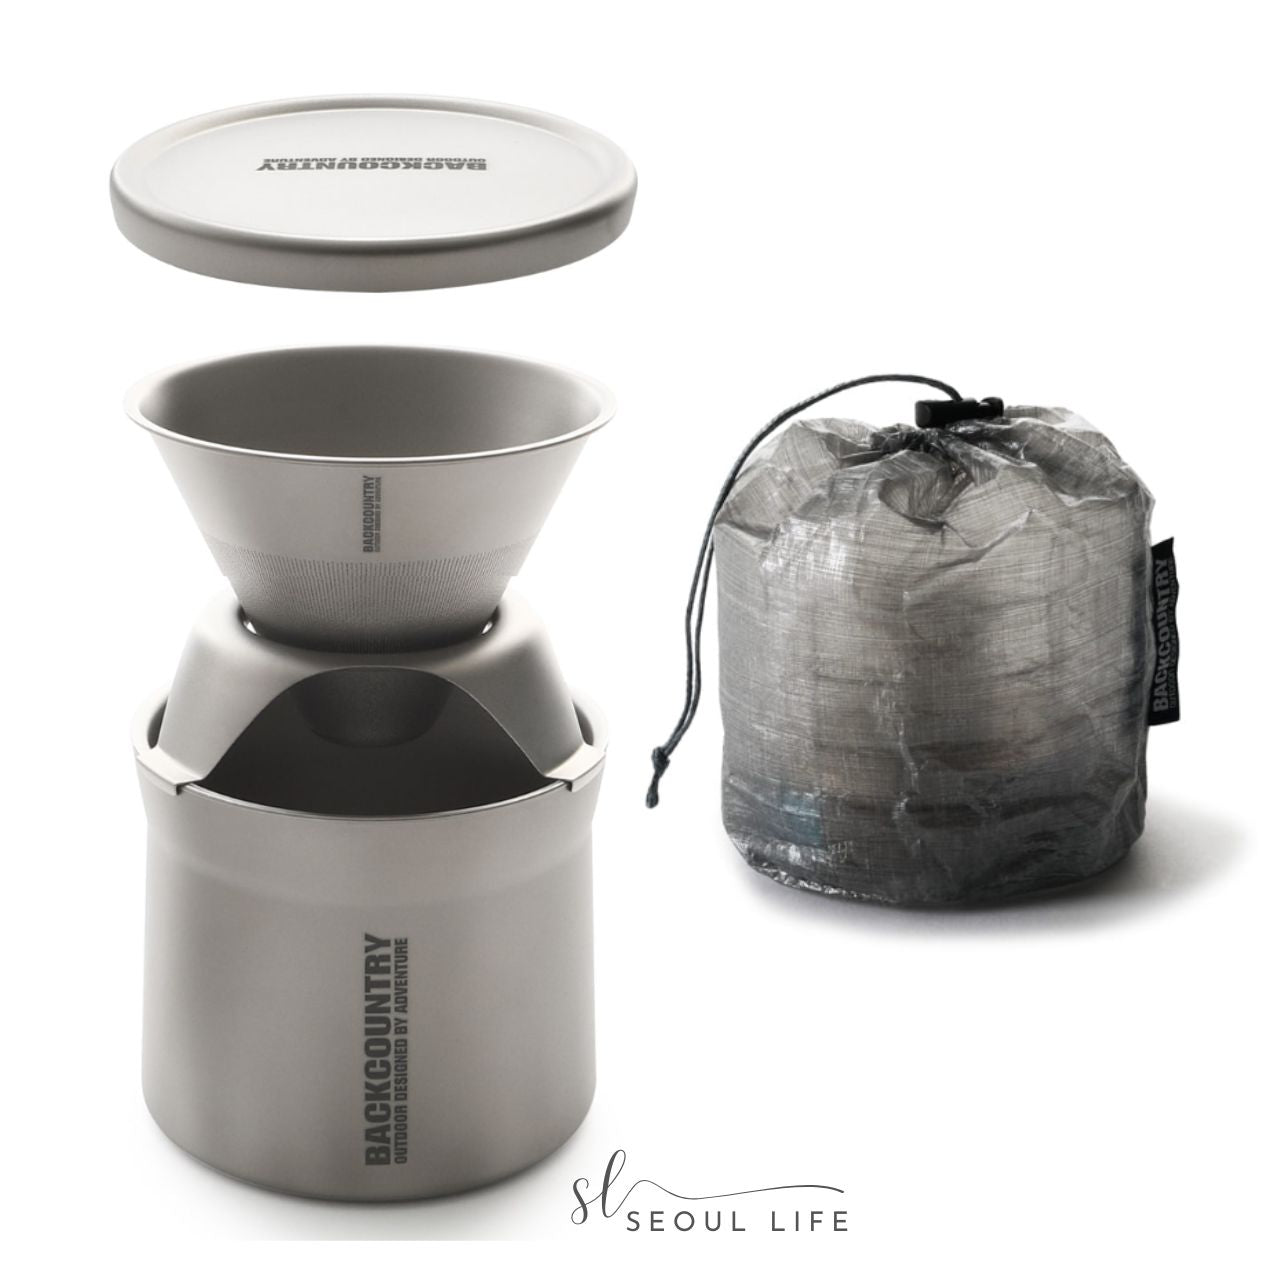 Titanium Coffee Maker for outdoors, Camping, Backpacking, Hiking, Traveling